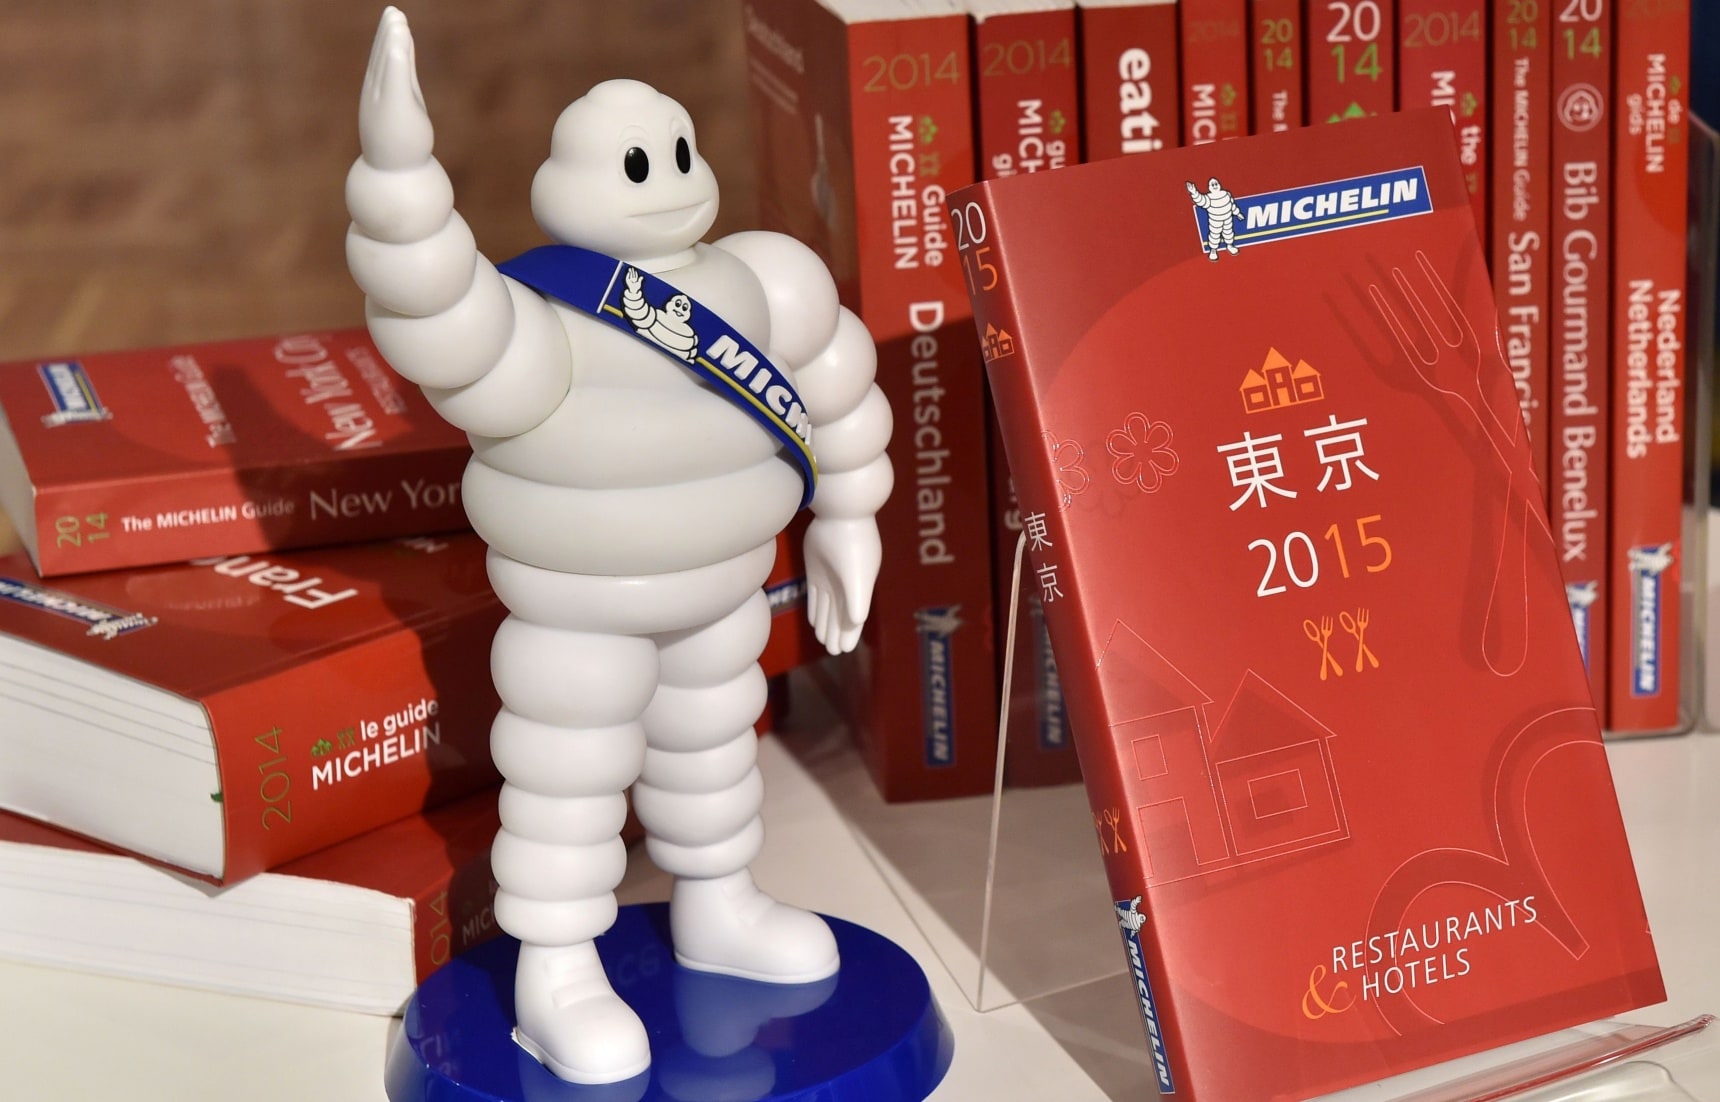 Your Guide to the Michelin Guide